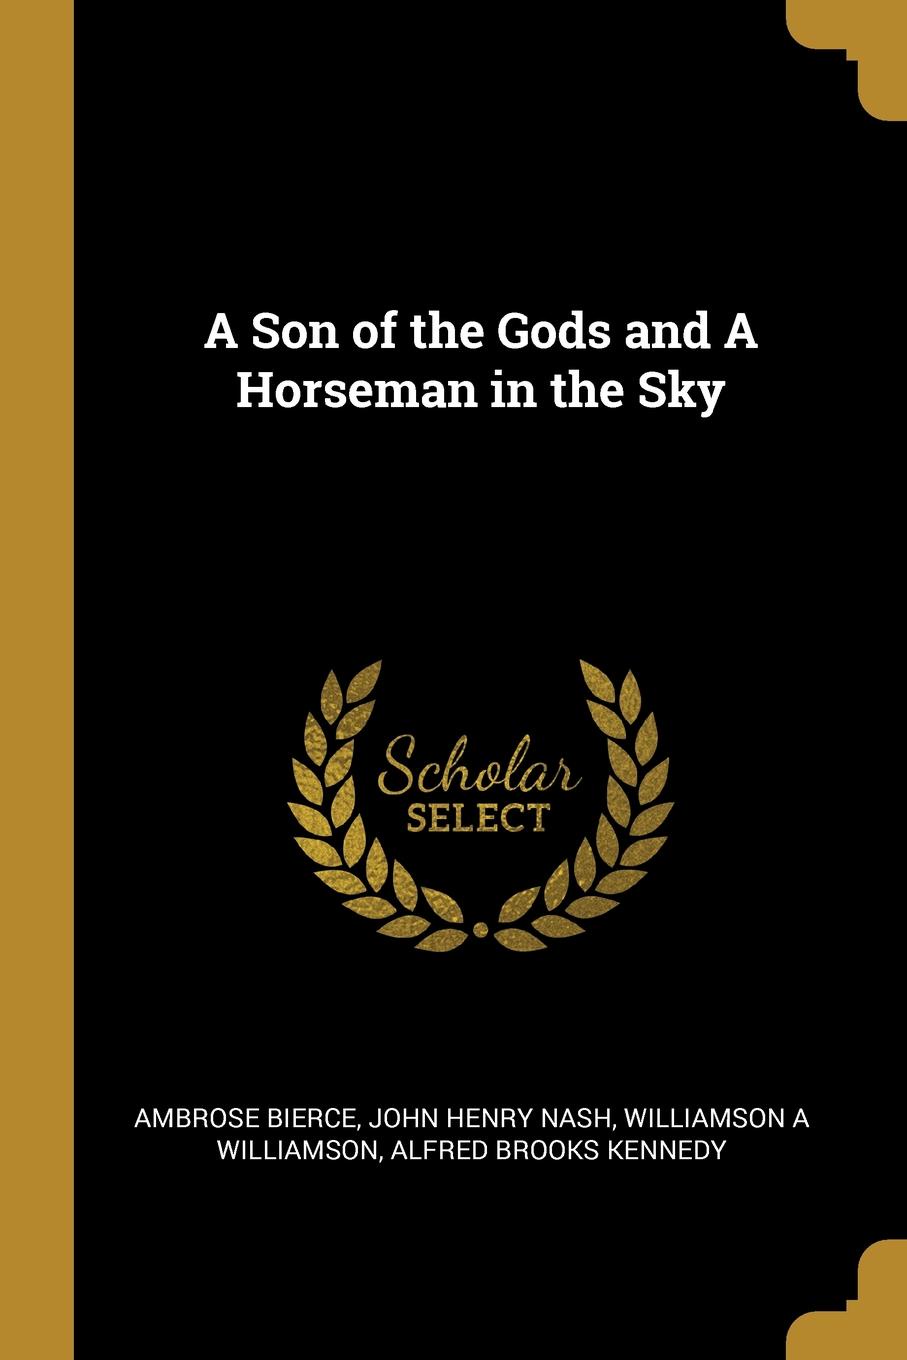 A Son of the Gods and A Horseman in the Sky